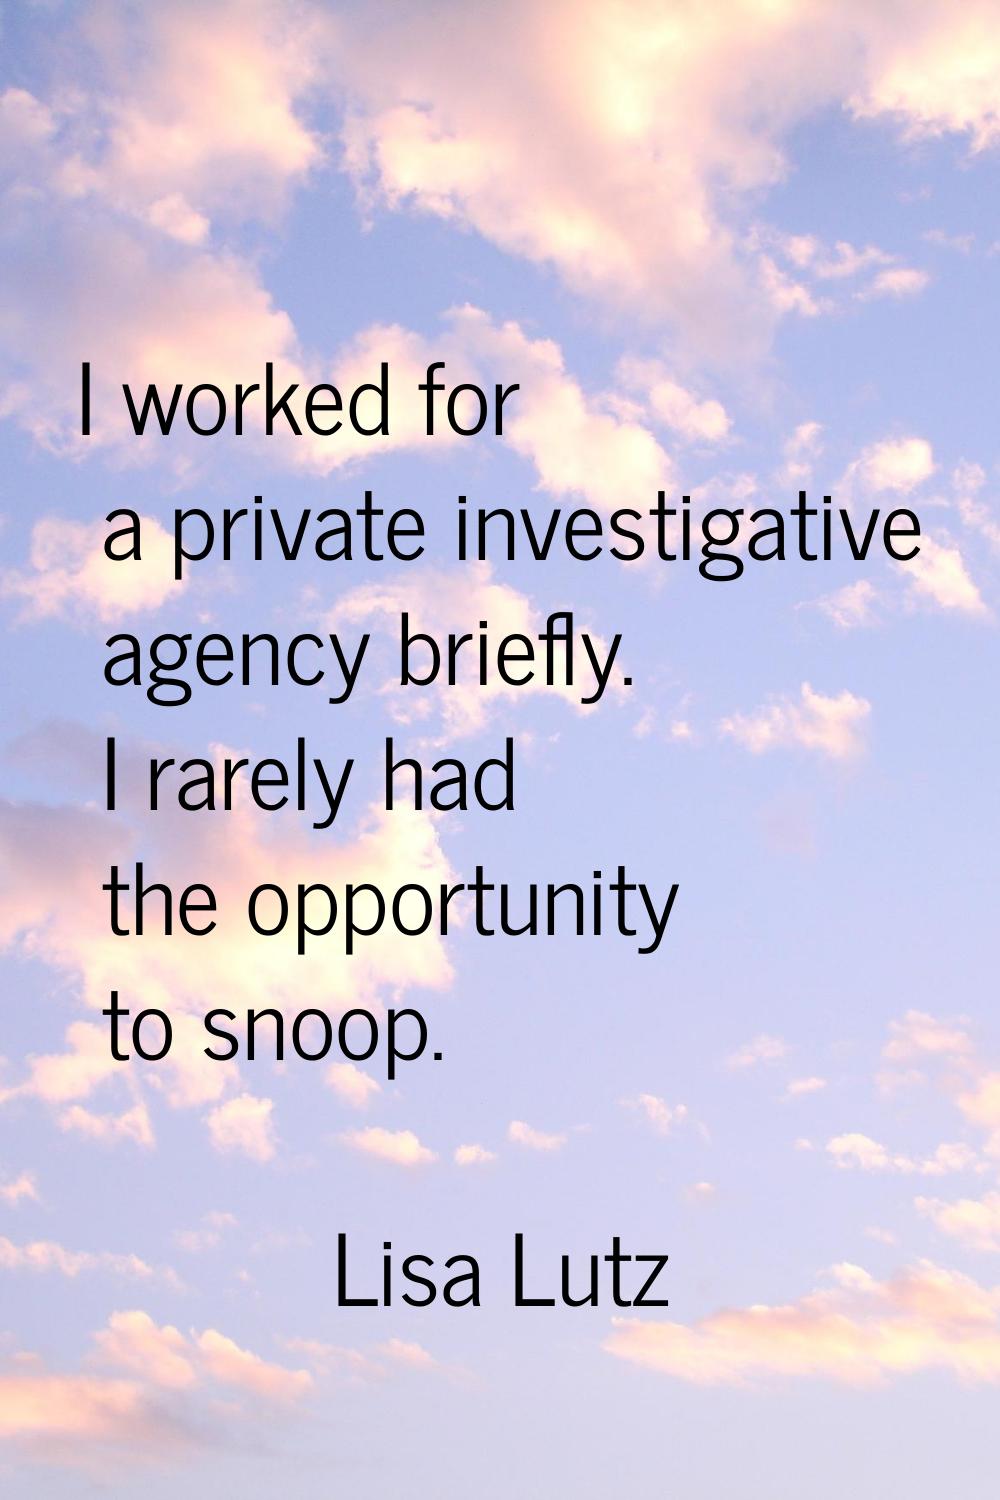 I worked for a private investigative agency briefly. I rarely had the opportunity to snoop.